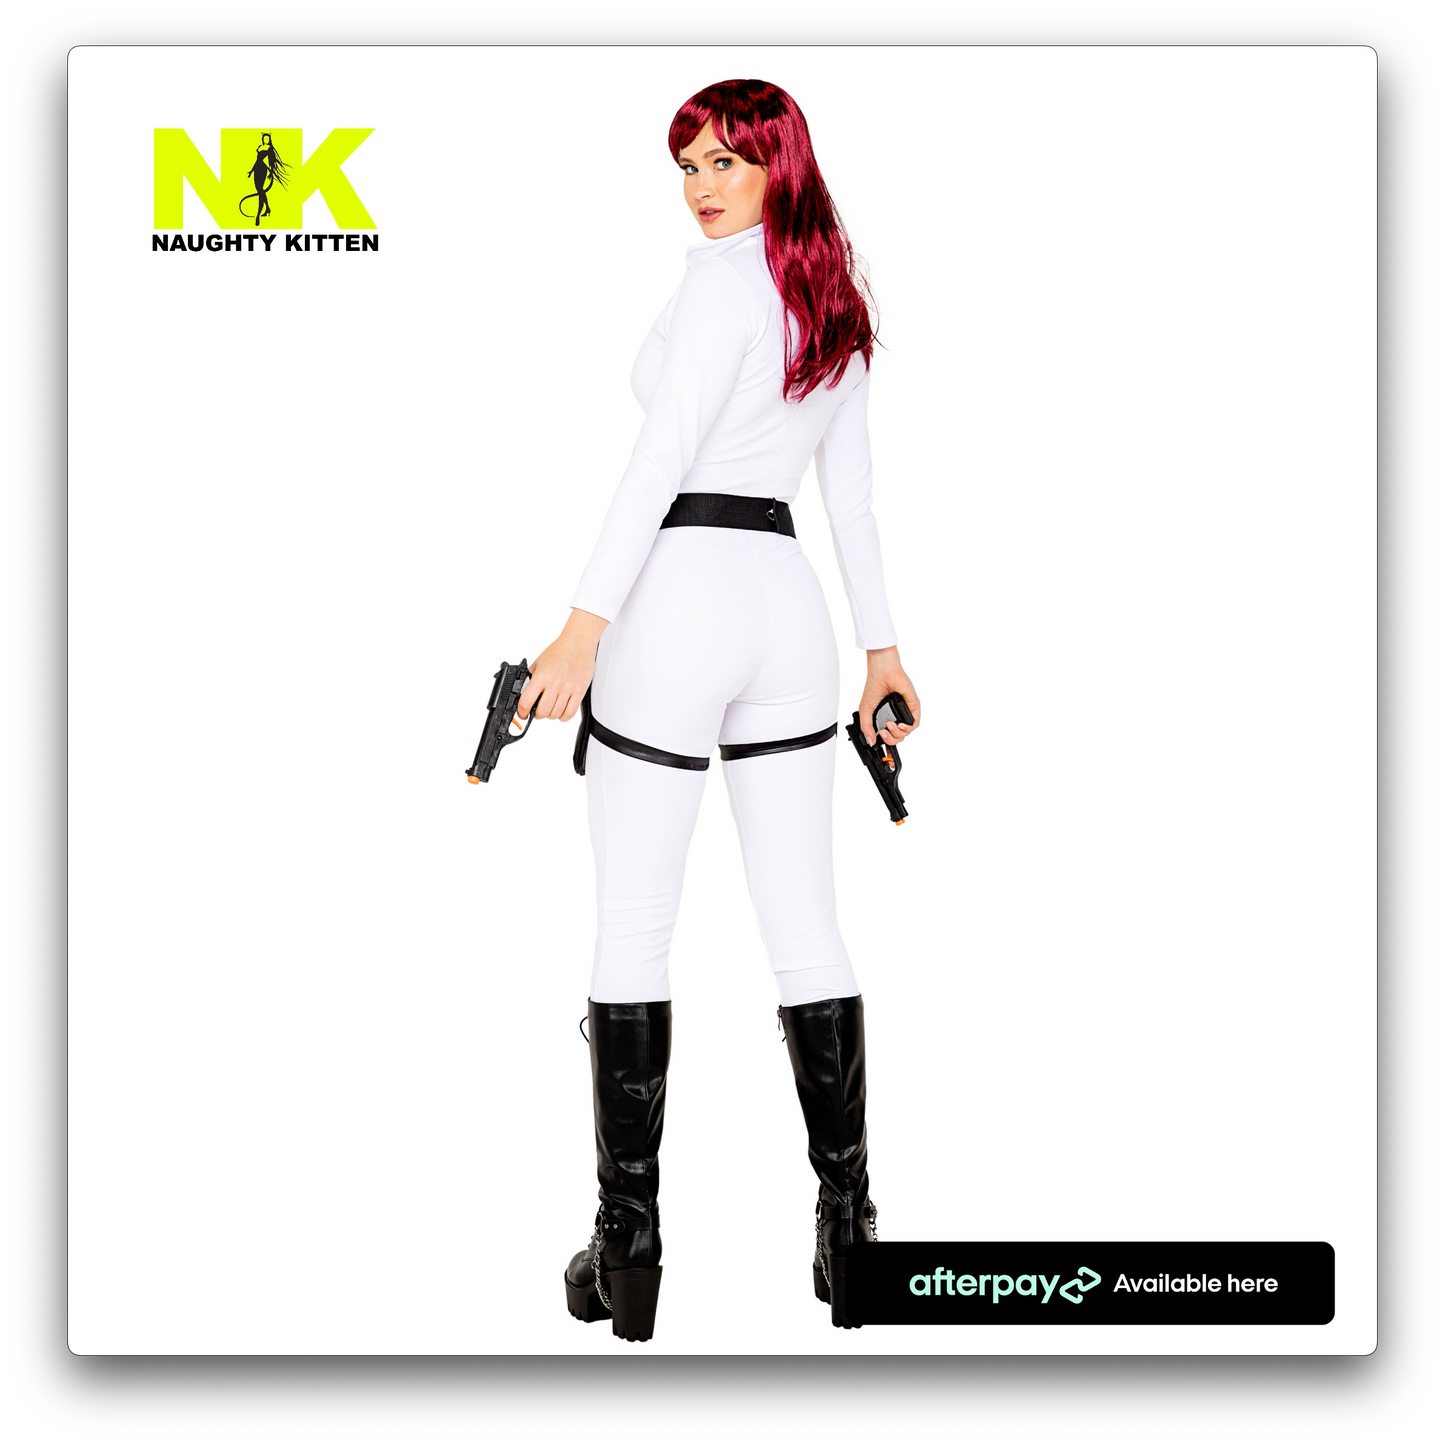 Black Ops Spy Costume Back Rear View - Naughty Kitten Clothing Halloween Costume